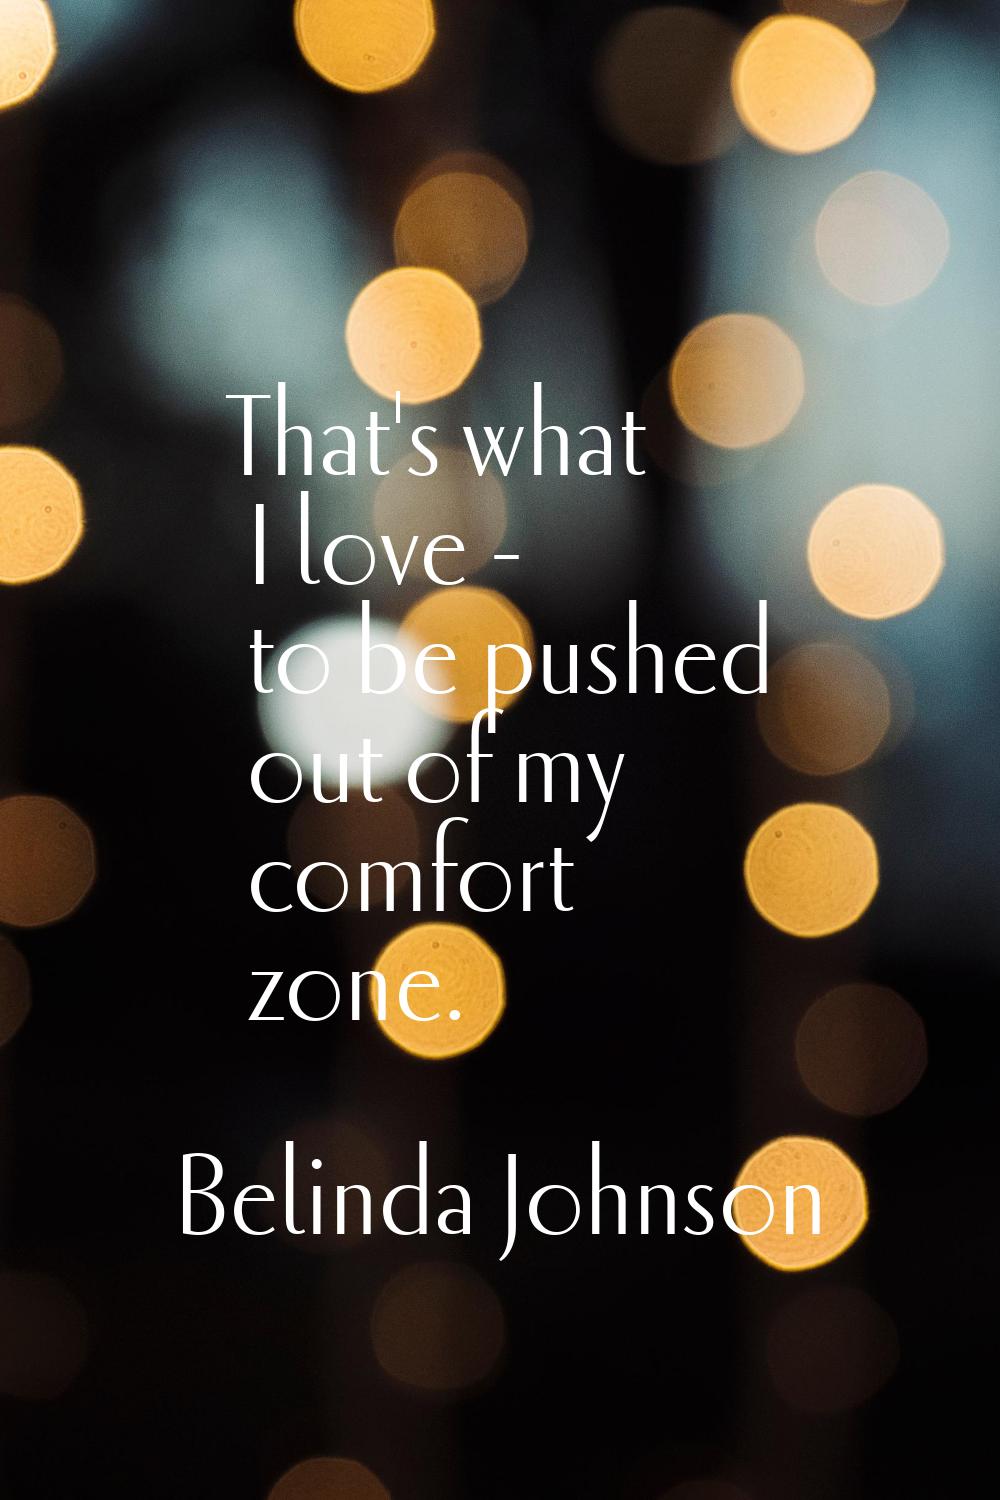 That's what I love - to be pushed out of my comfort zone.